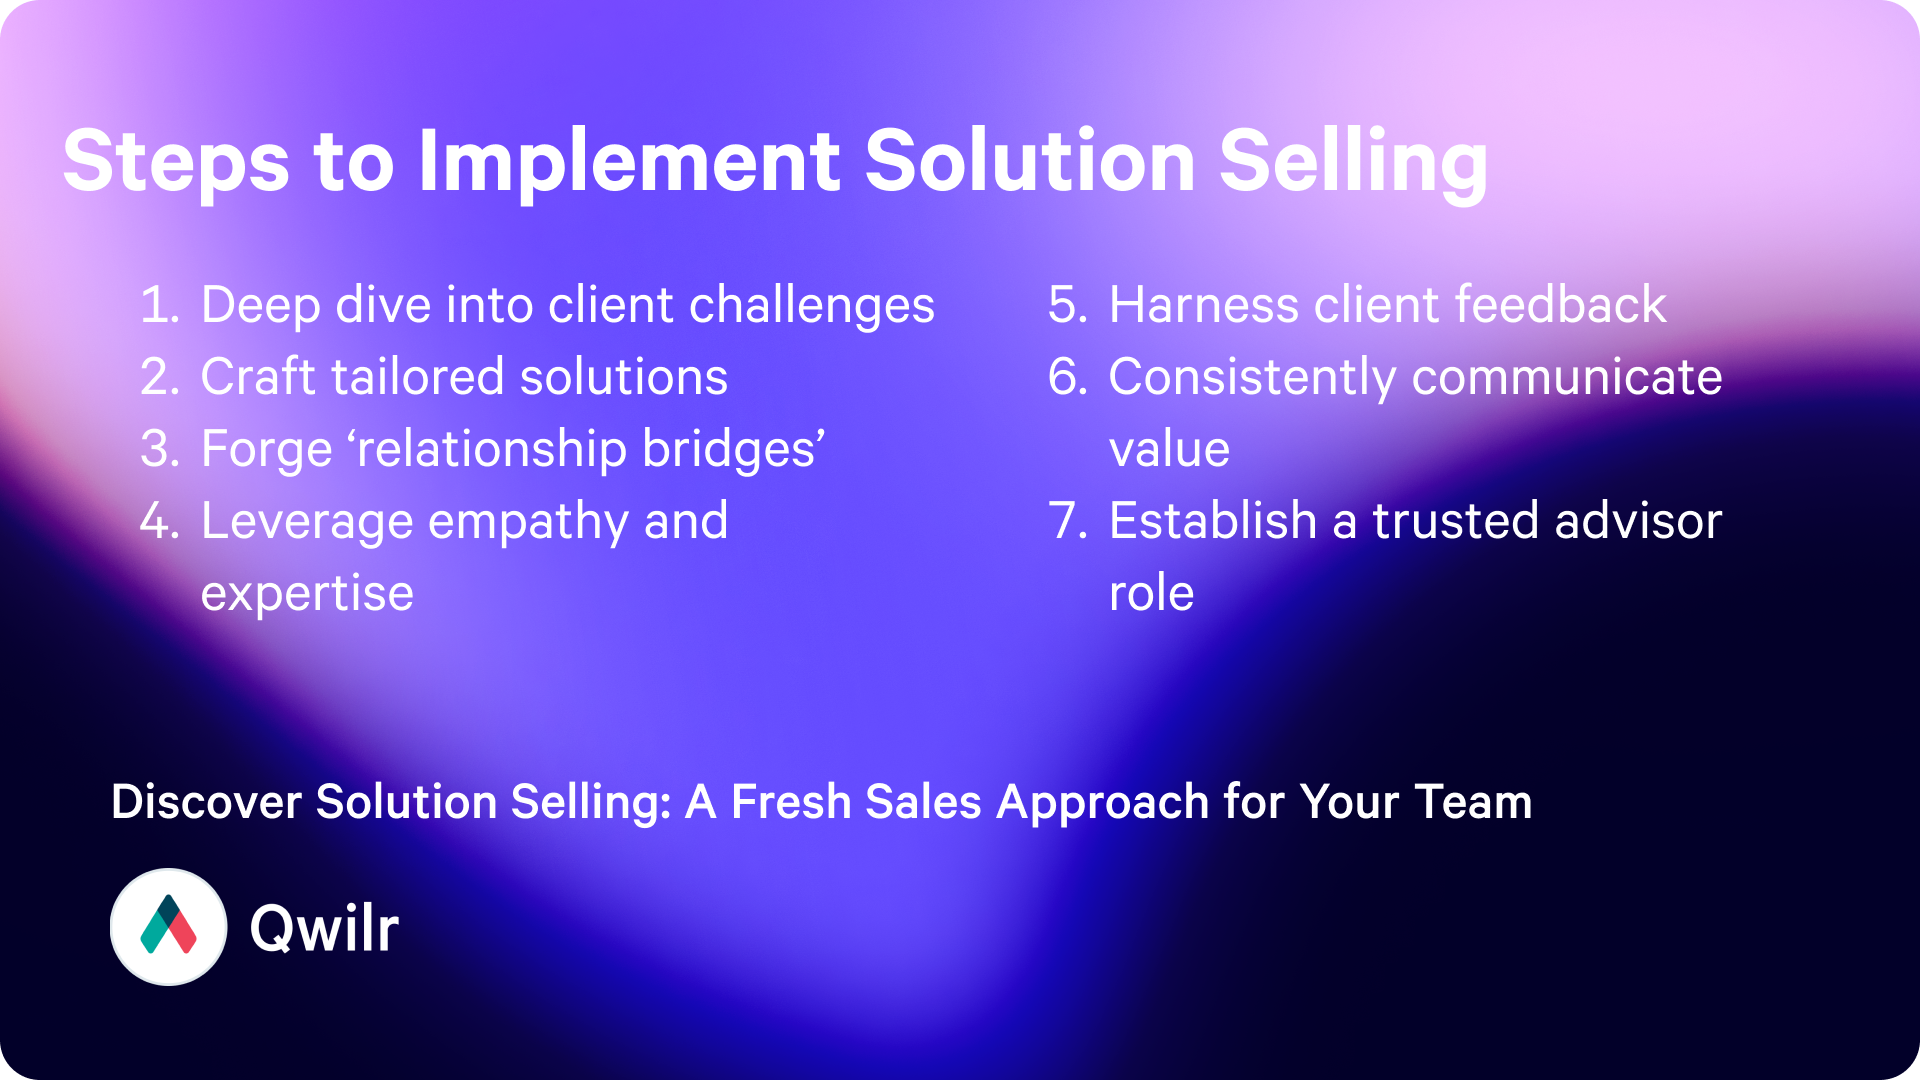 Summary of the Steps to Implement Solution Selling